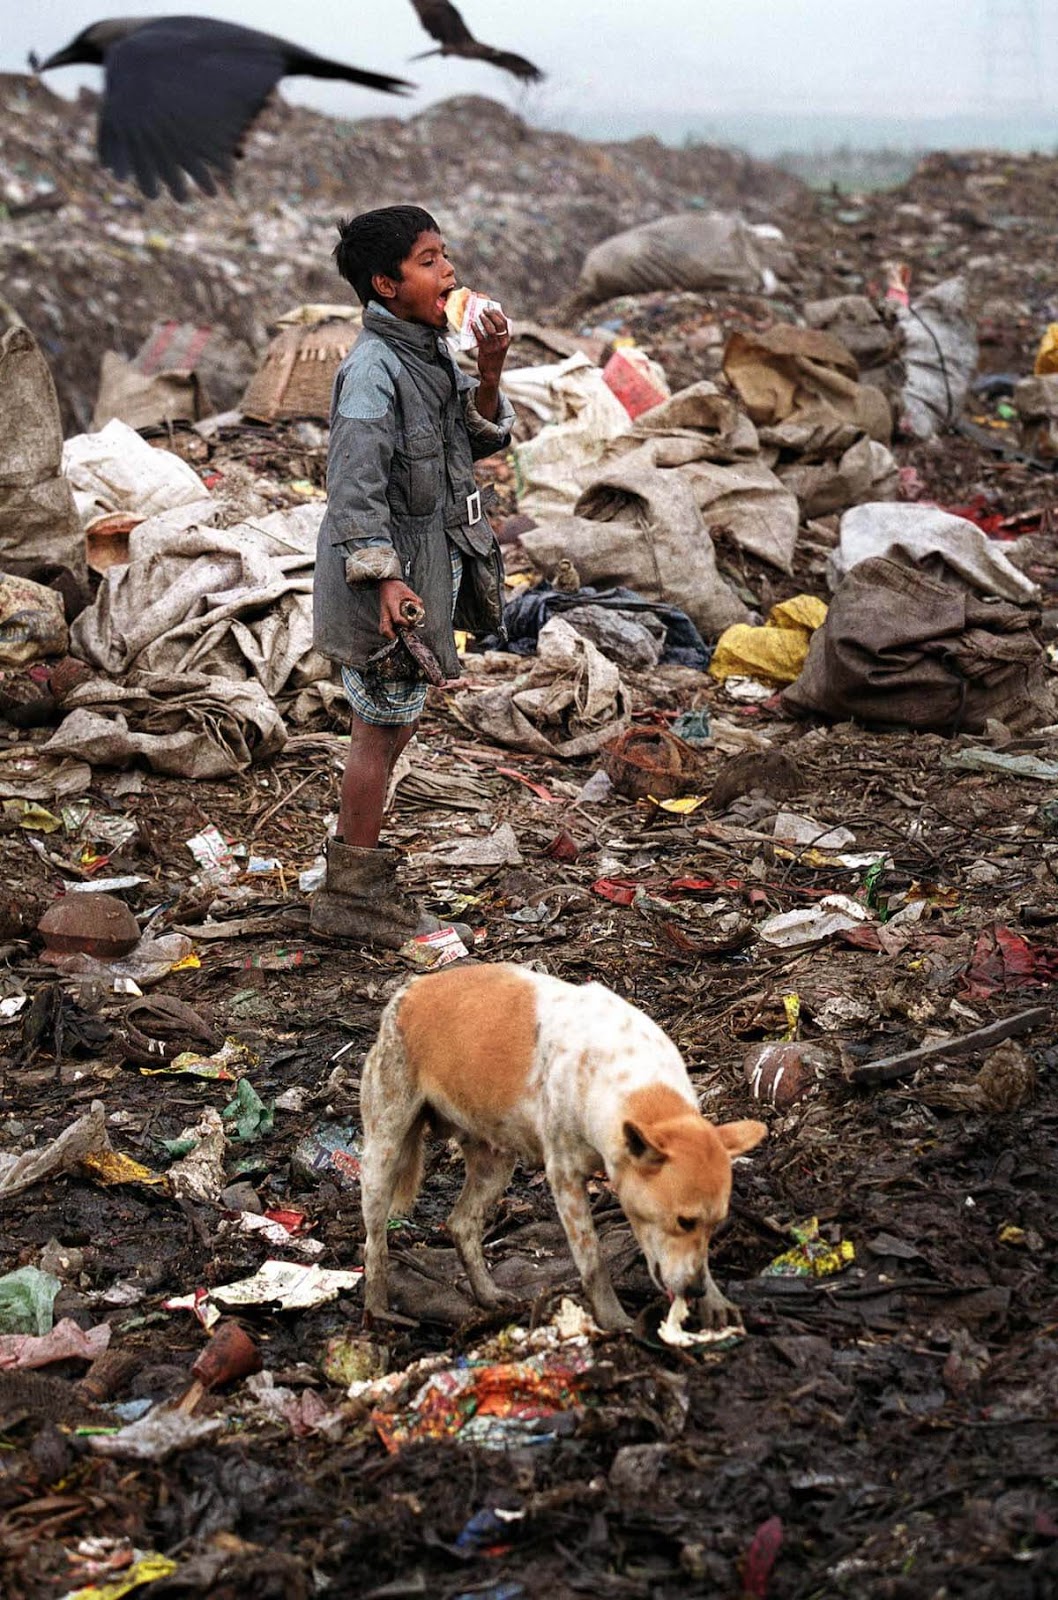 Interview: Bangladeshi Photojournalist Captures The Cruel Reality Of Child Labour